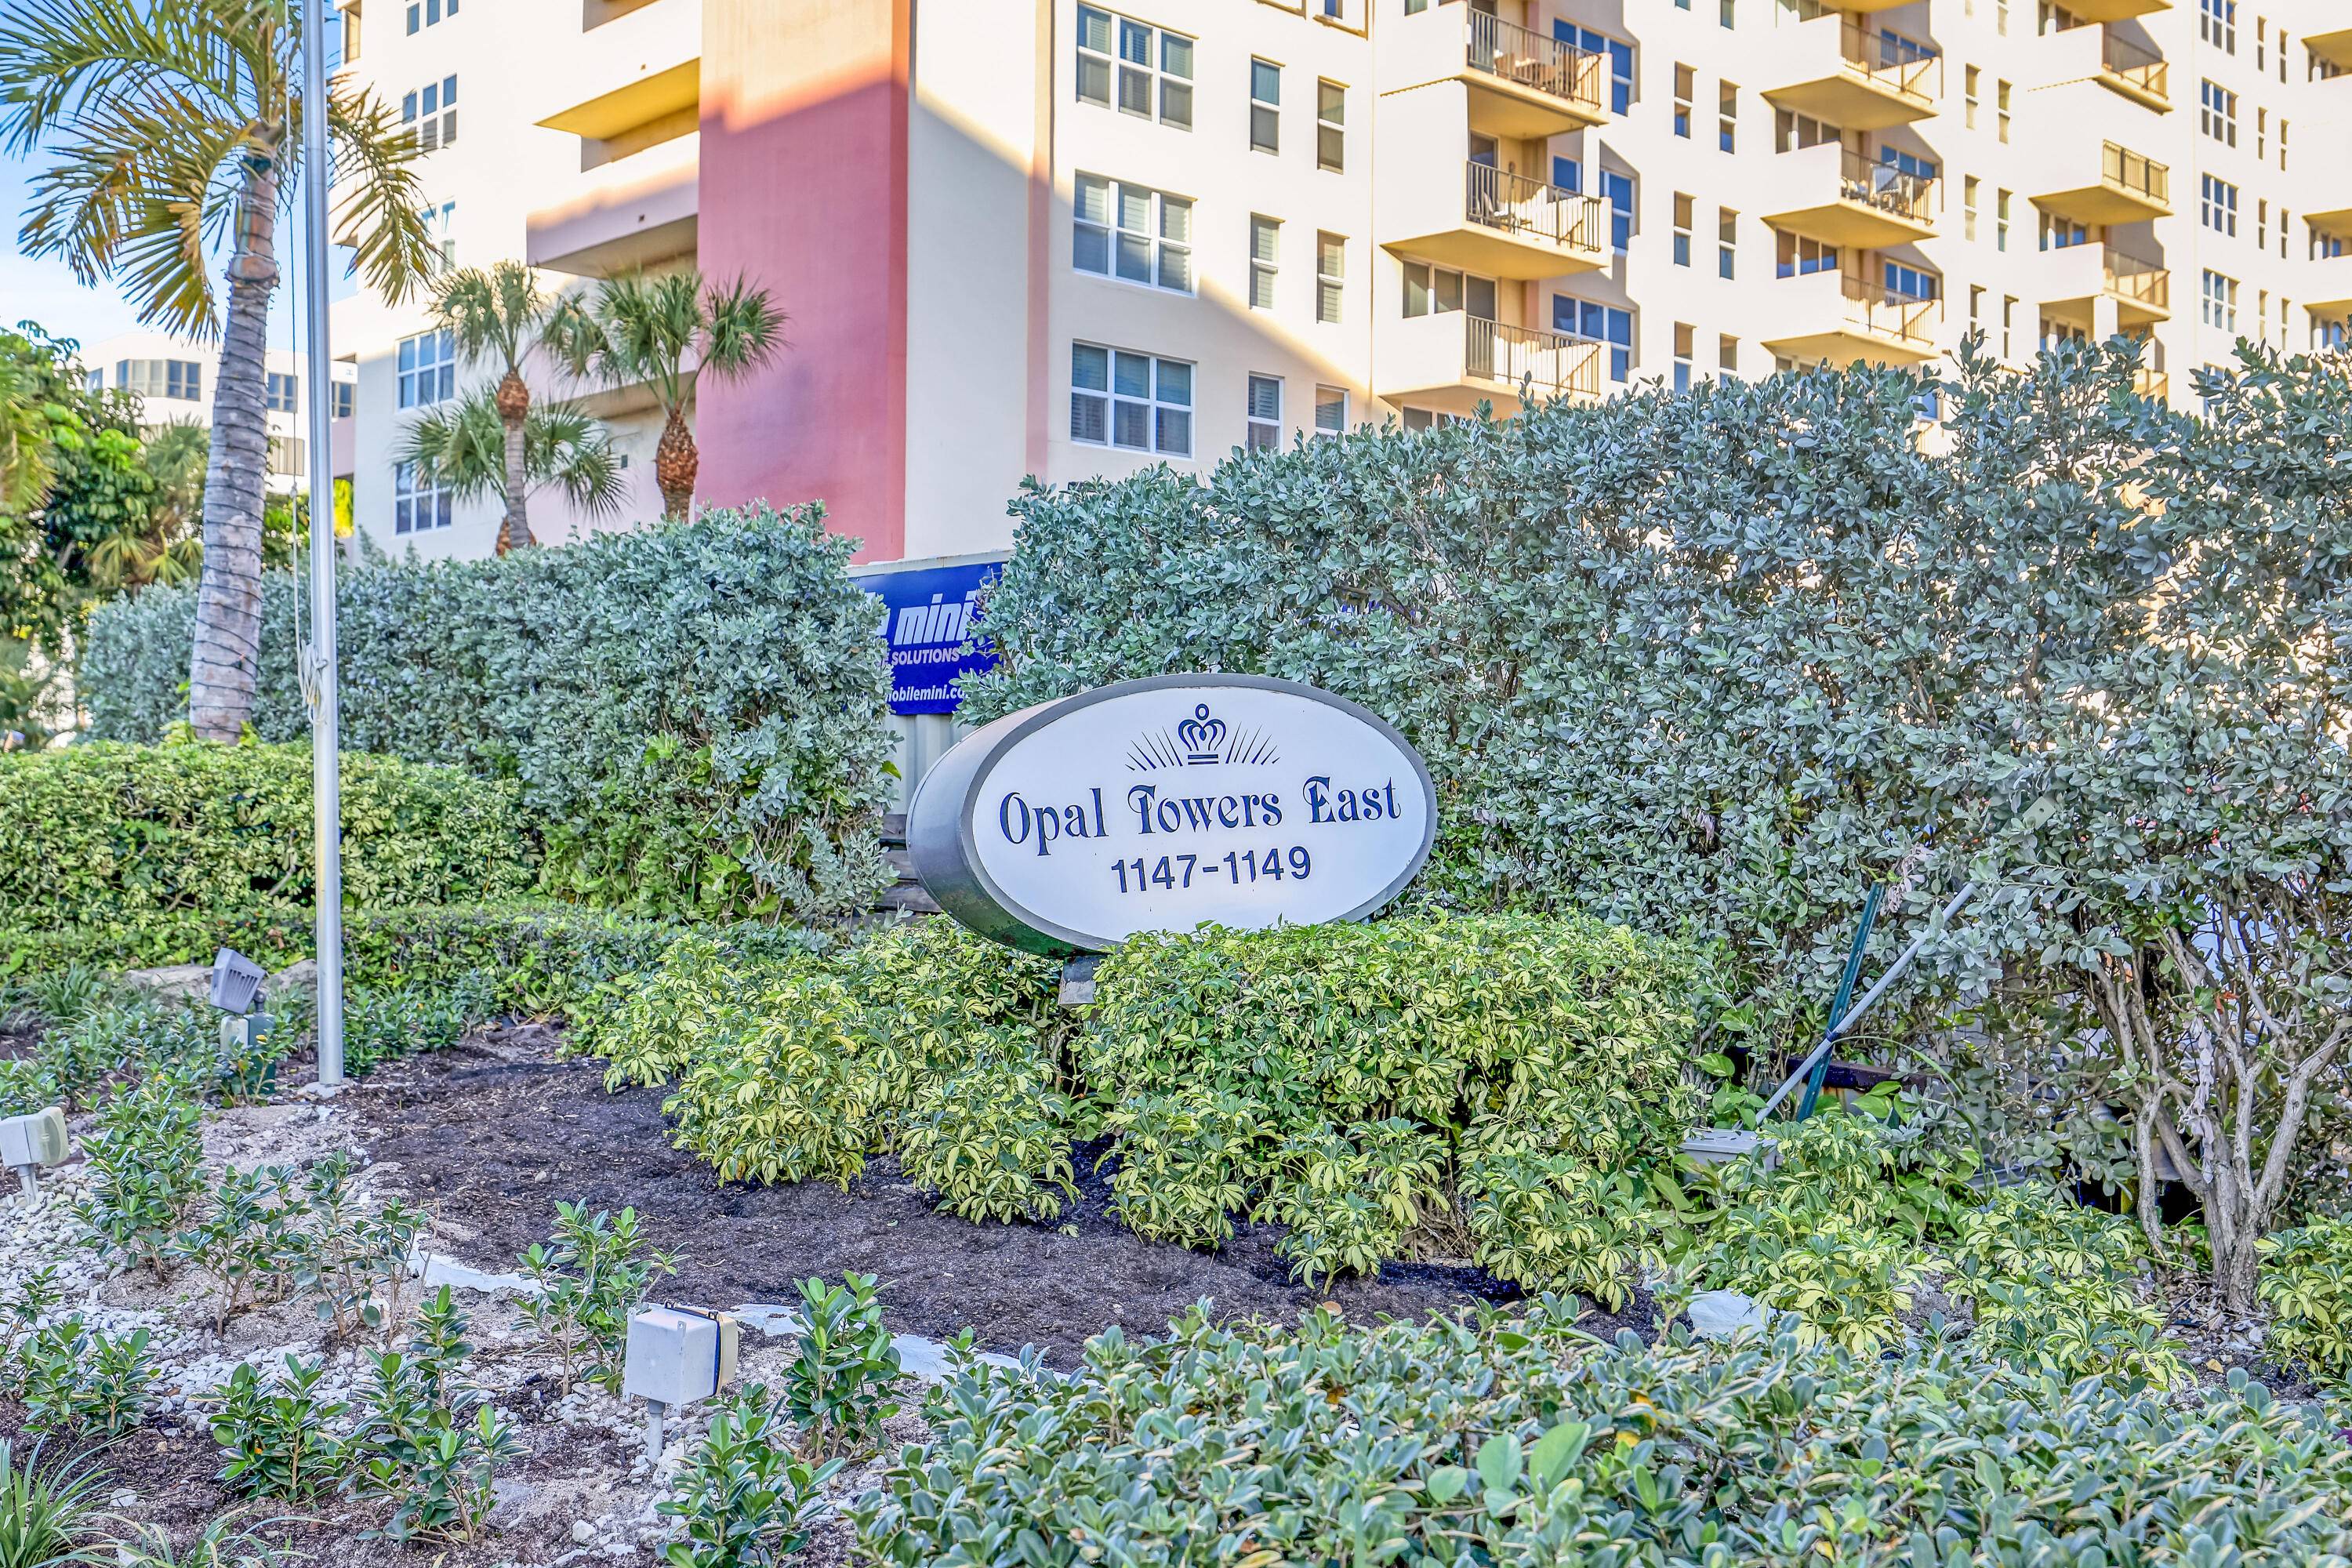 STUNNING OCEAN, INTRACOASTAL, AND CITY VIEWS FROM THIS BEAUTIFULLY TOTALLY UPGRADED 2 BEDROOM 1 DEN 3RD BEDROOM 2 BATH CONDO on Millionaire Mile In the Luxurious Opal Towers East.